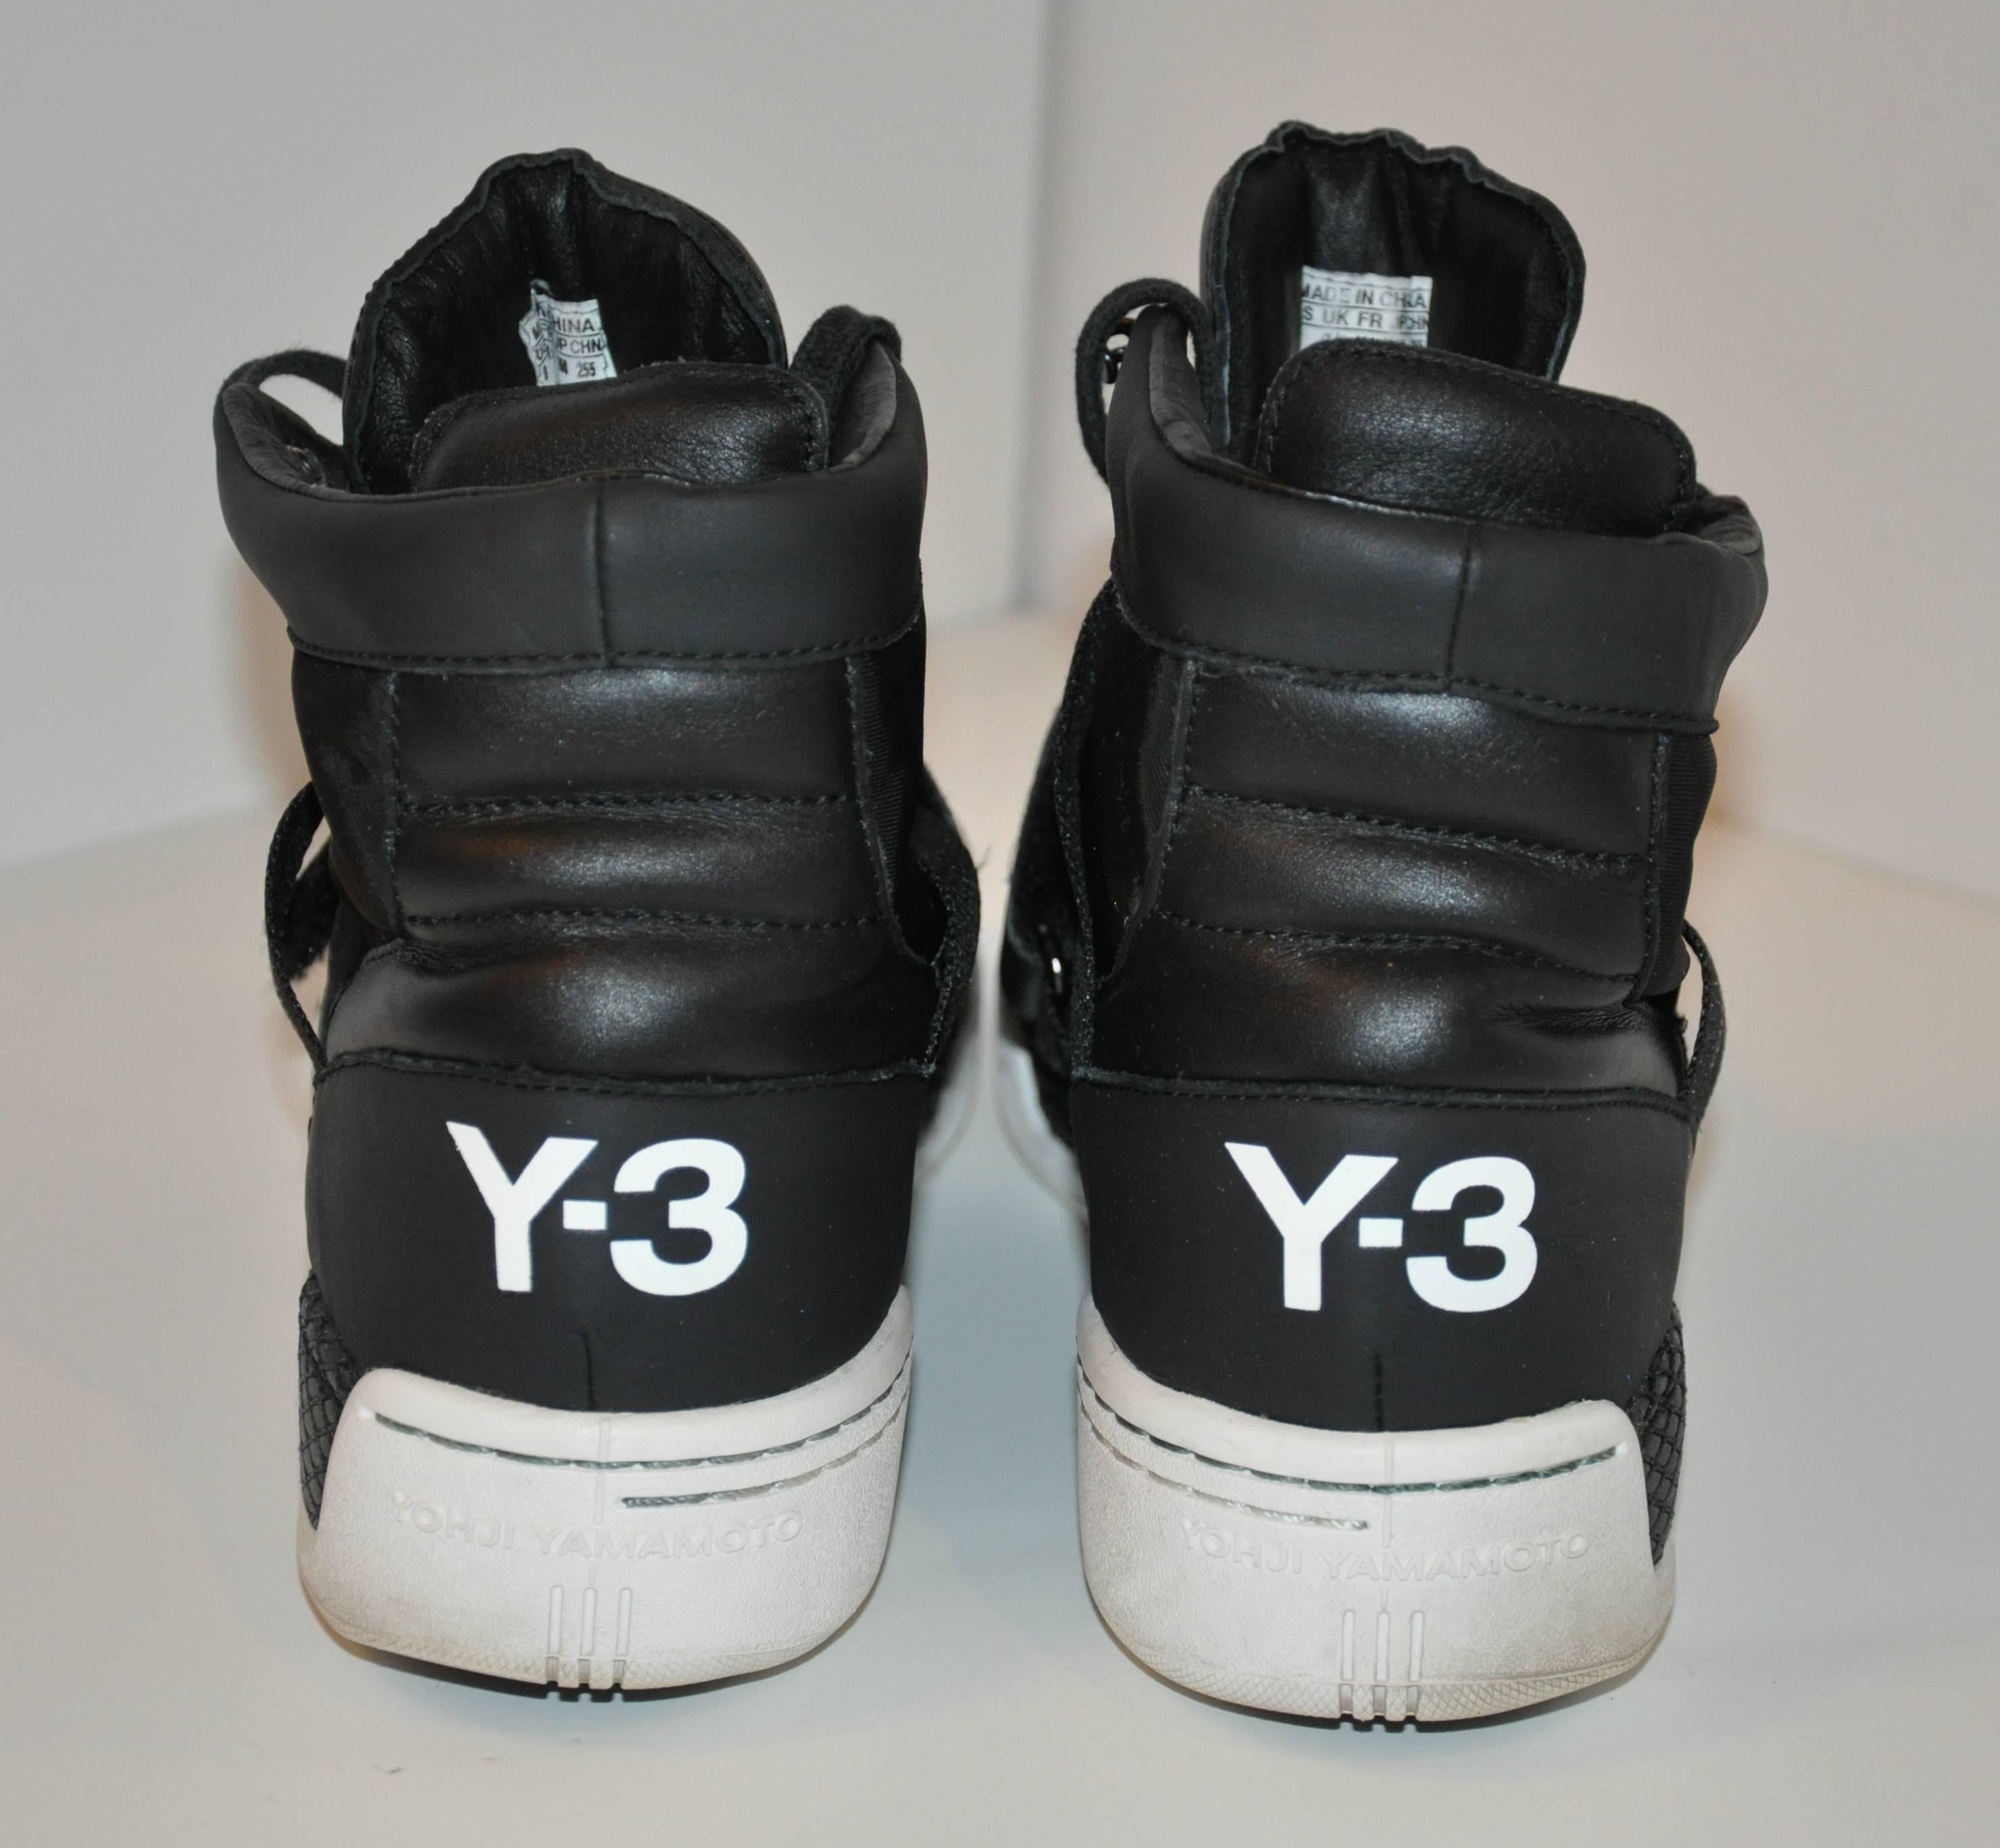 Yohji Yamamoto's wonderfully detailed black high-top lace-up sneakers has the option of an 